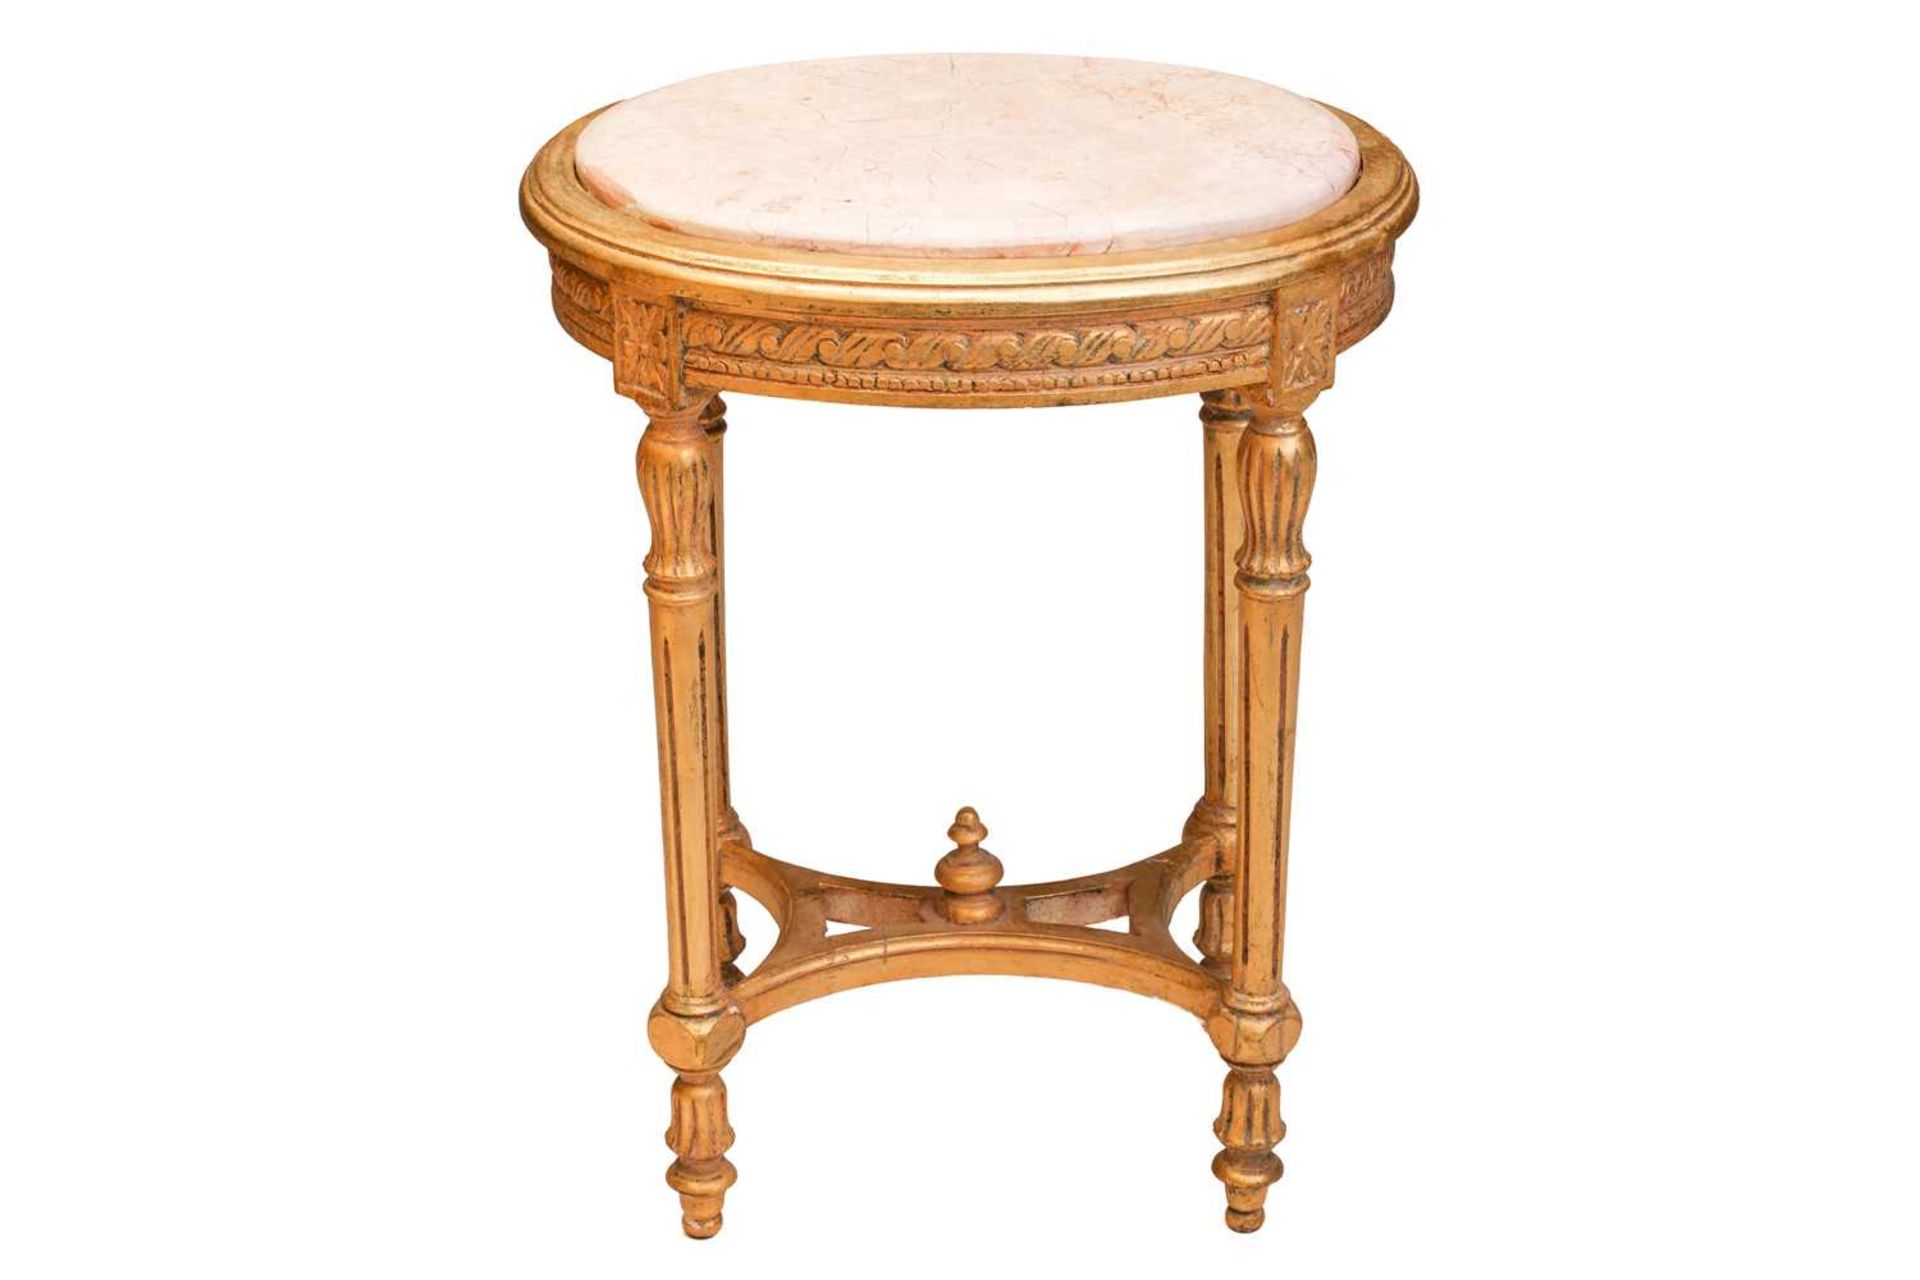 A Louis XVI style marble-topped oval giltwood table, 20th century with turned supports and shaped - Image 2 of 10